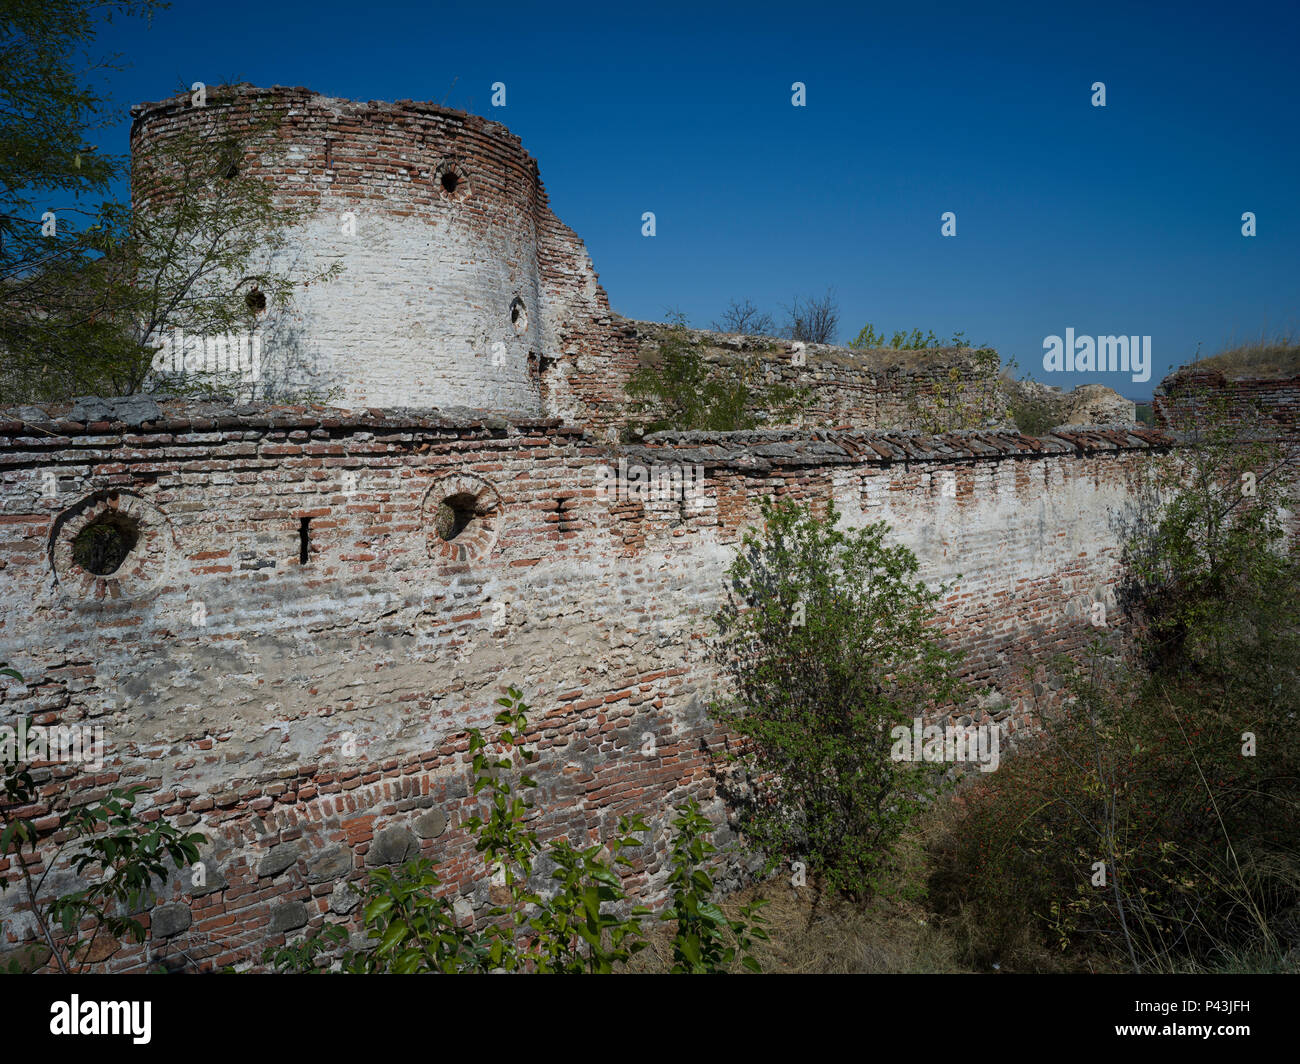 Fortified wall of Kladovo Fortress, Kladovo, Bor District, Serbia Stock Photo